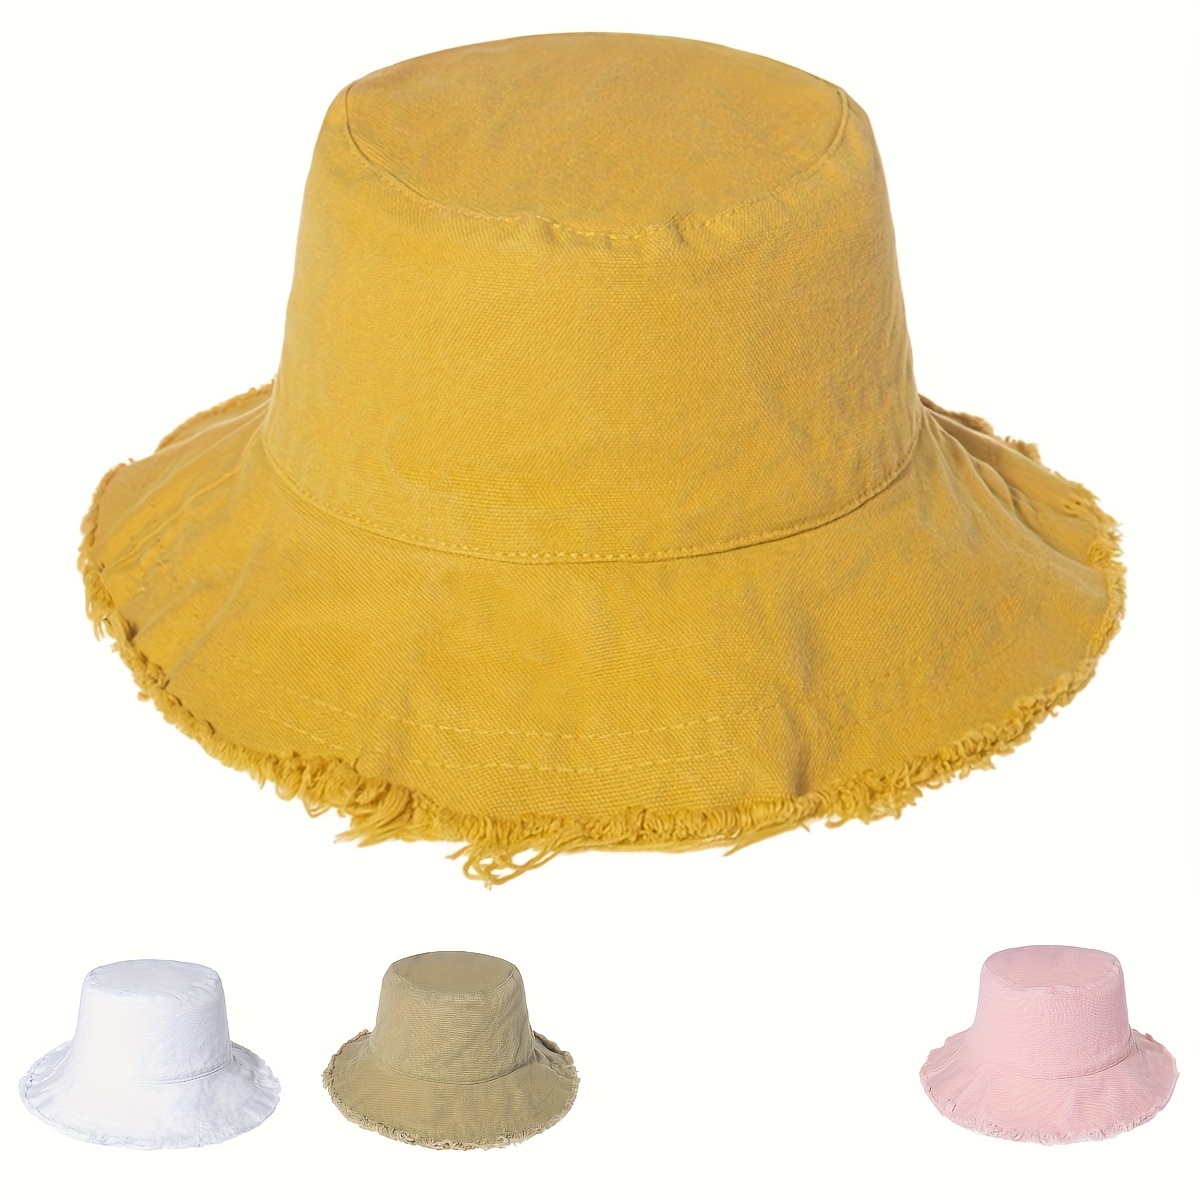 

Foldable Raw Bucket Hat For Men And Women, Unisex Summer Sun Bucket Hat With Large Wide Brim And Uv Protection, Panama Style Beach Hat